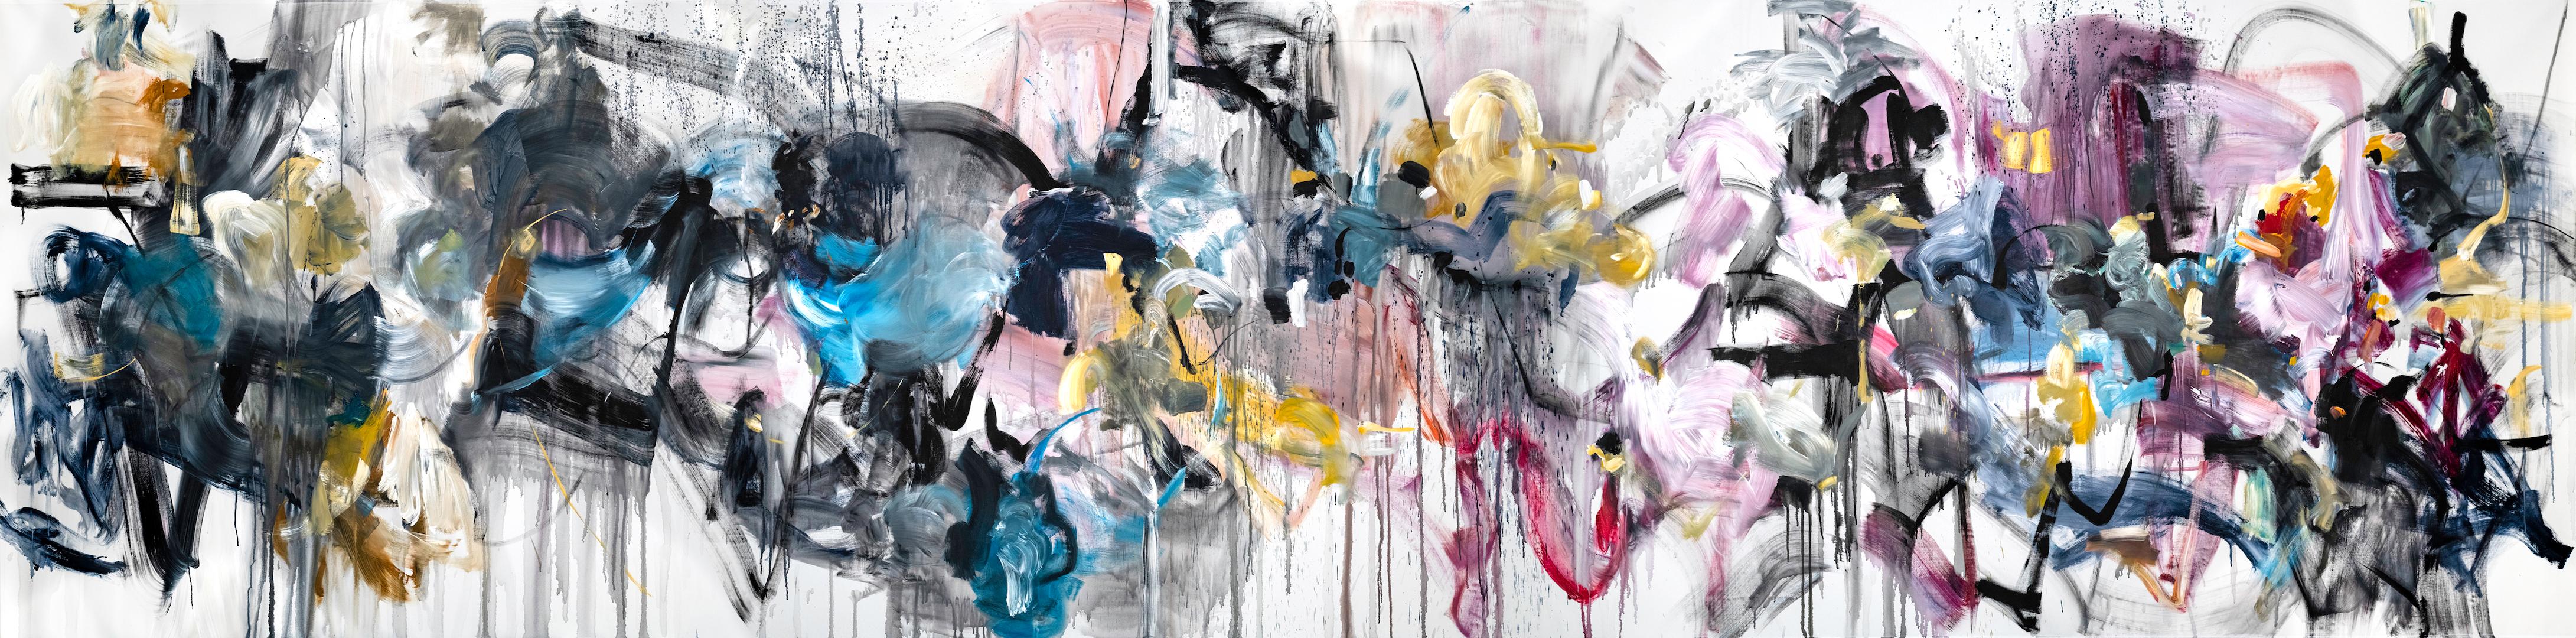 Vicky Barranguet Abstract Painting - Love by the Yard 1